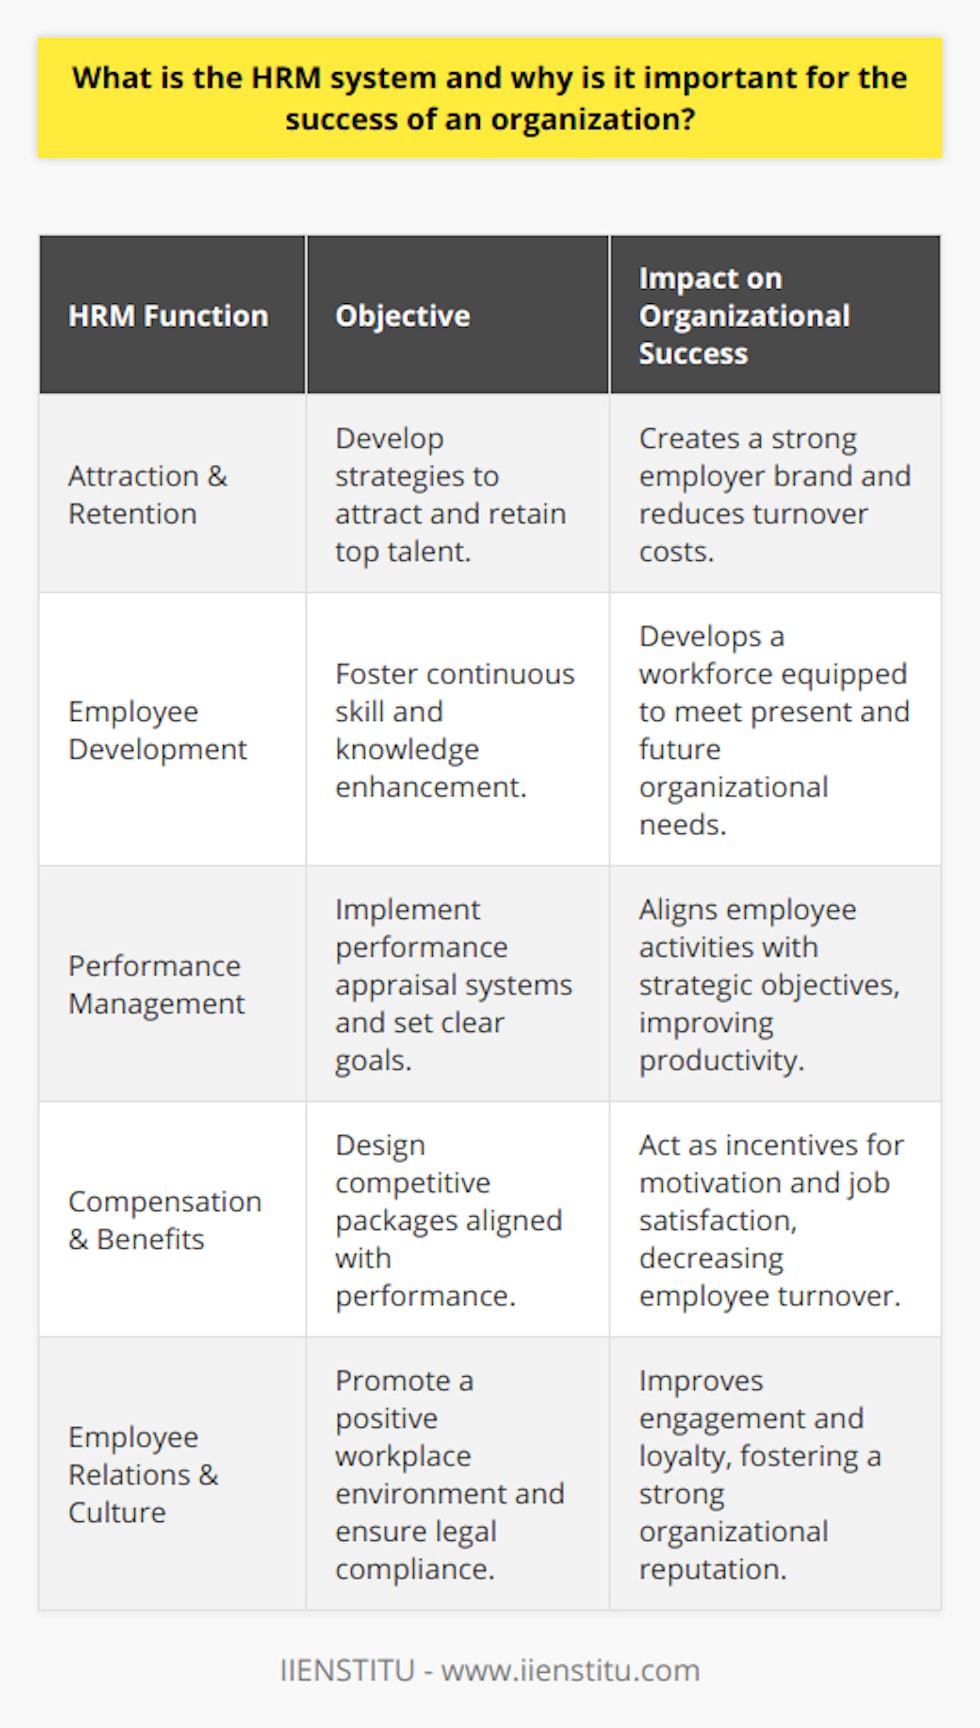 The Human Resource Management (HRM) system is an integral function within an organization that manages all aspects related to its workforce. It encompasses a comprehensive set of practices and processes aimed at efficiently managing people within an institution to contribute to the organization's objectives and sustainability.Why HRM is Critical for Organizational Success:Attracting and Retaining Talent:HRM systems are crucial for developing strategies that enhance an organization's ability to attract top talent in a competitive job market. Equally important is the system's ability to retain this talent through employee satisfaction and loyalty initiatives. A competent HRM system helps in creating a robust employer brand that appeals to high-caliber candidates.Employee Development and Skill Enhancement:An organization's adaptability and growth heavily depend on the continual development of its employees' skills and knowledge. Through well-structured training and development programs, HRM ensures that employees are equipped to take on current and future challenges. This investment not only bolsters the employees' capabilities but also benefits the organization through improved performance and innovation.Performance Management:HRM systems provide frameworks for goal setting, performance appraisals, and feedback channels, enabling employees to align their efforts with the organization's strategic objectives. Effective performance management leads to a clear understanding of expectations, recognizes achievements, and identifies areas for improvement, thereby driving performance standards across the organization.Compensation and Benefits:A strategic HRM system ensures that compensation packages are structured to attract and retain top talent while also reflecting the organization's financial reality and conforming to market standards. The alignment of rewards with employee performance acts as a motivator and can result in increased productivity.Employee Relations and Work Culture:HRM is pivotal in cultivating a positive workplace culture that promotes employee engagement, collaboration, and well-being. The system includes managing employee relations, ensuring compliance with employment laws, and developing policies that support a healthy work-life balance. A positive work environment fosters loyalty, reduces turnover, and enhances organizational reputation.In summation, HRM systems play a vital role in any organization by managing the full employee lifecycle—from hiring to retirement. Effective HRM aligns with the strategic objectives of the company, ensuring that the workforce is engaged, well-managed, and optimally utilized. By investing in HRM, organizations can develop a strong workplace culture, enhance their competitive edge, and achieve sustainable success in their respective industries.